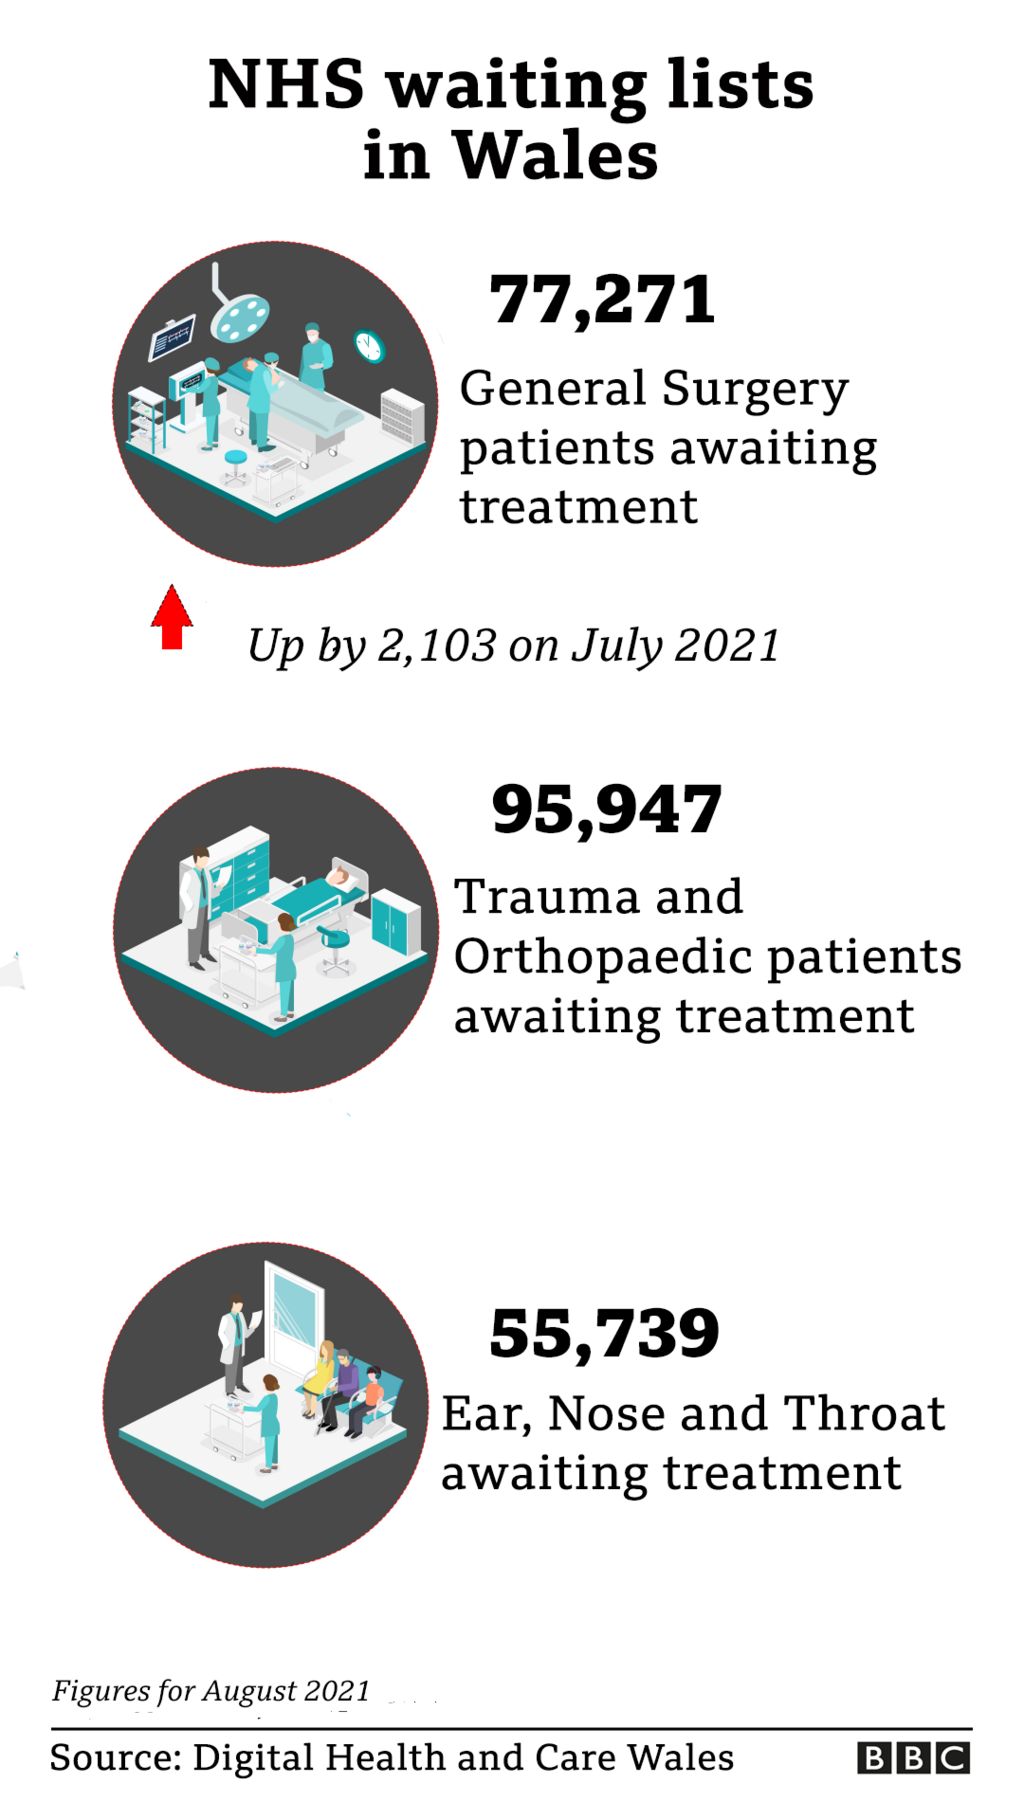 Graphic showing waiting lists for general surgery, trauma & orthopaedics and ear, nose and throat